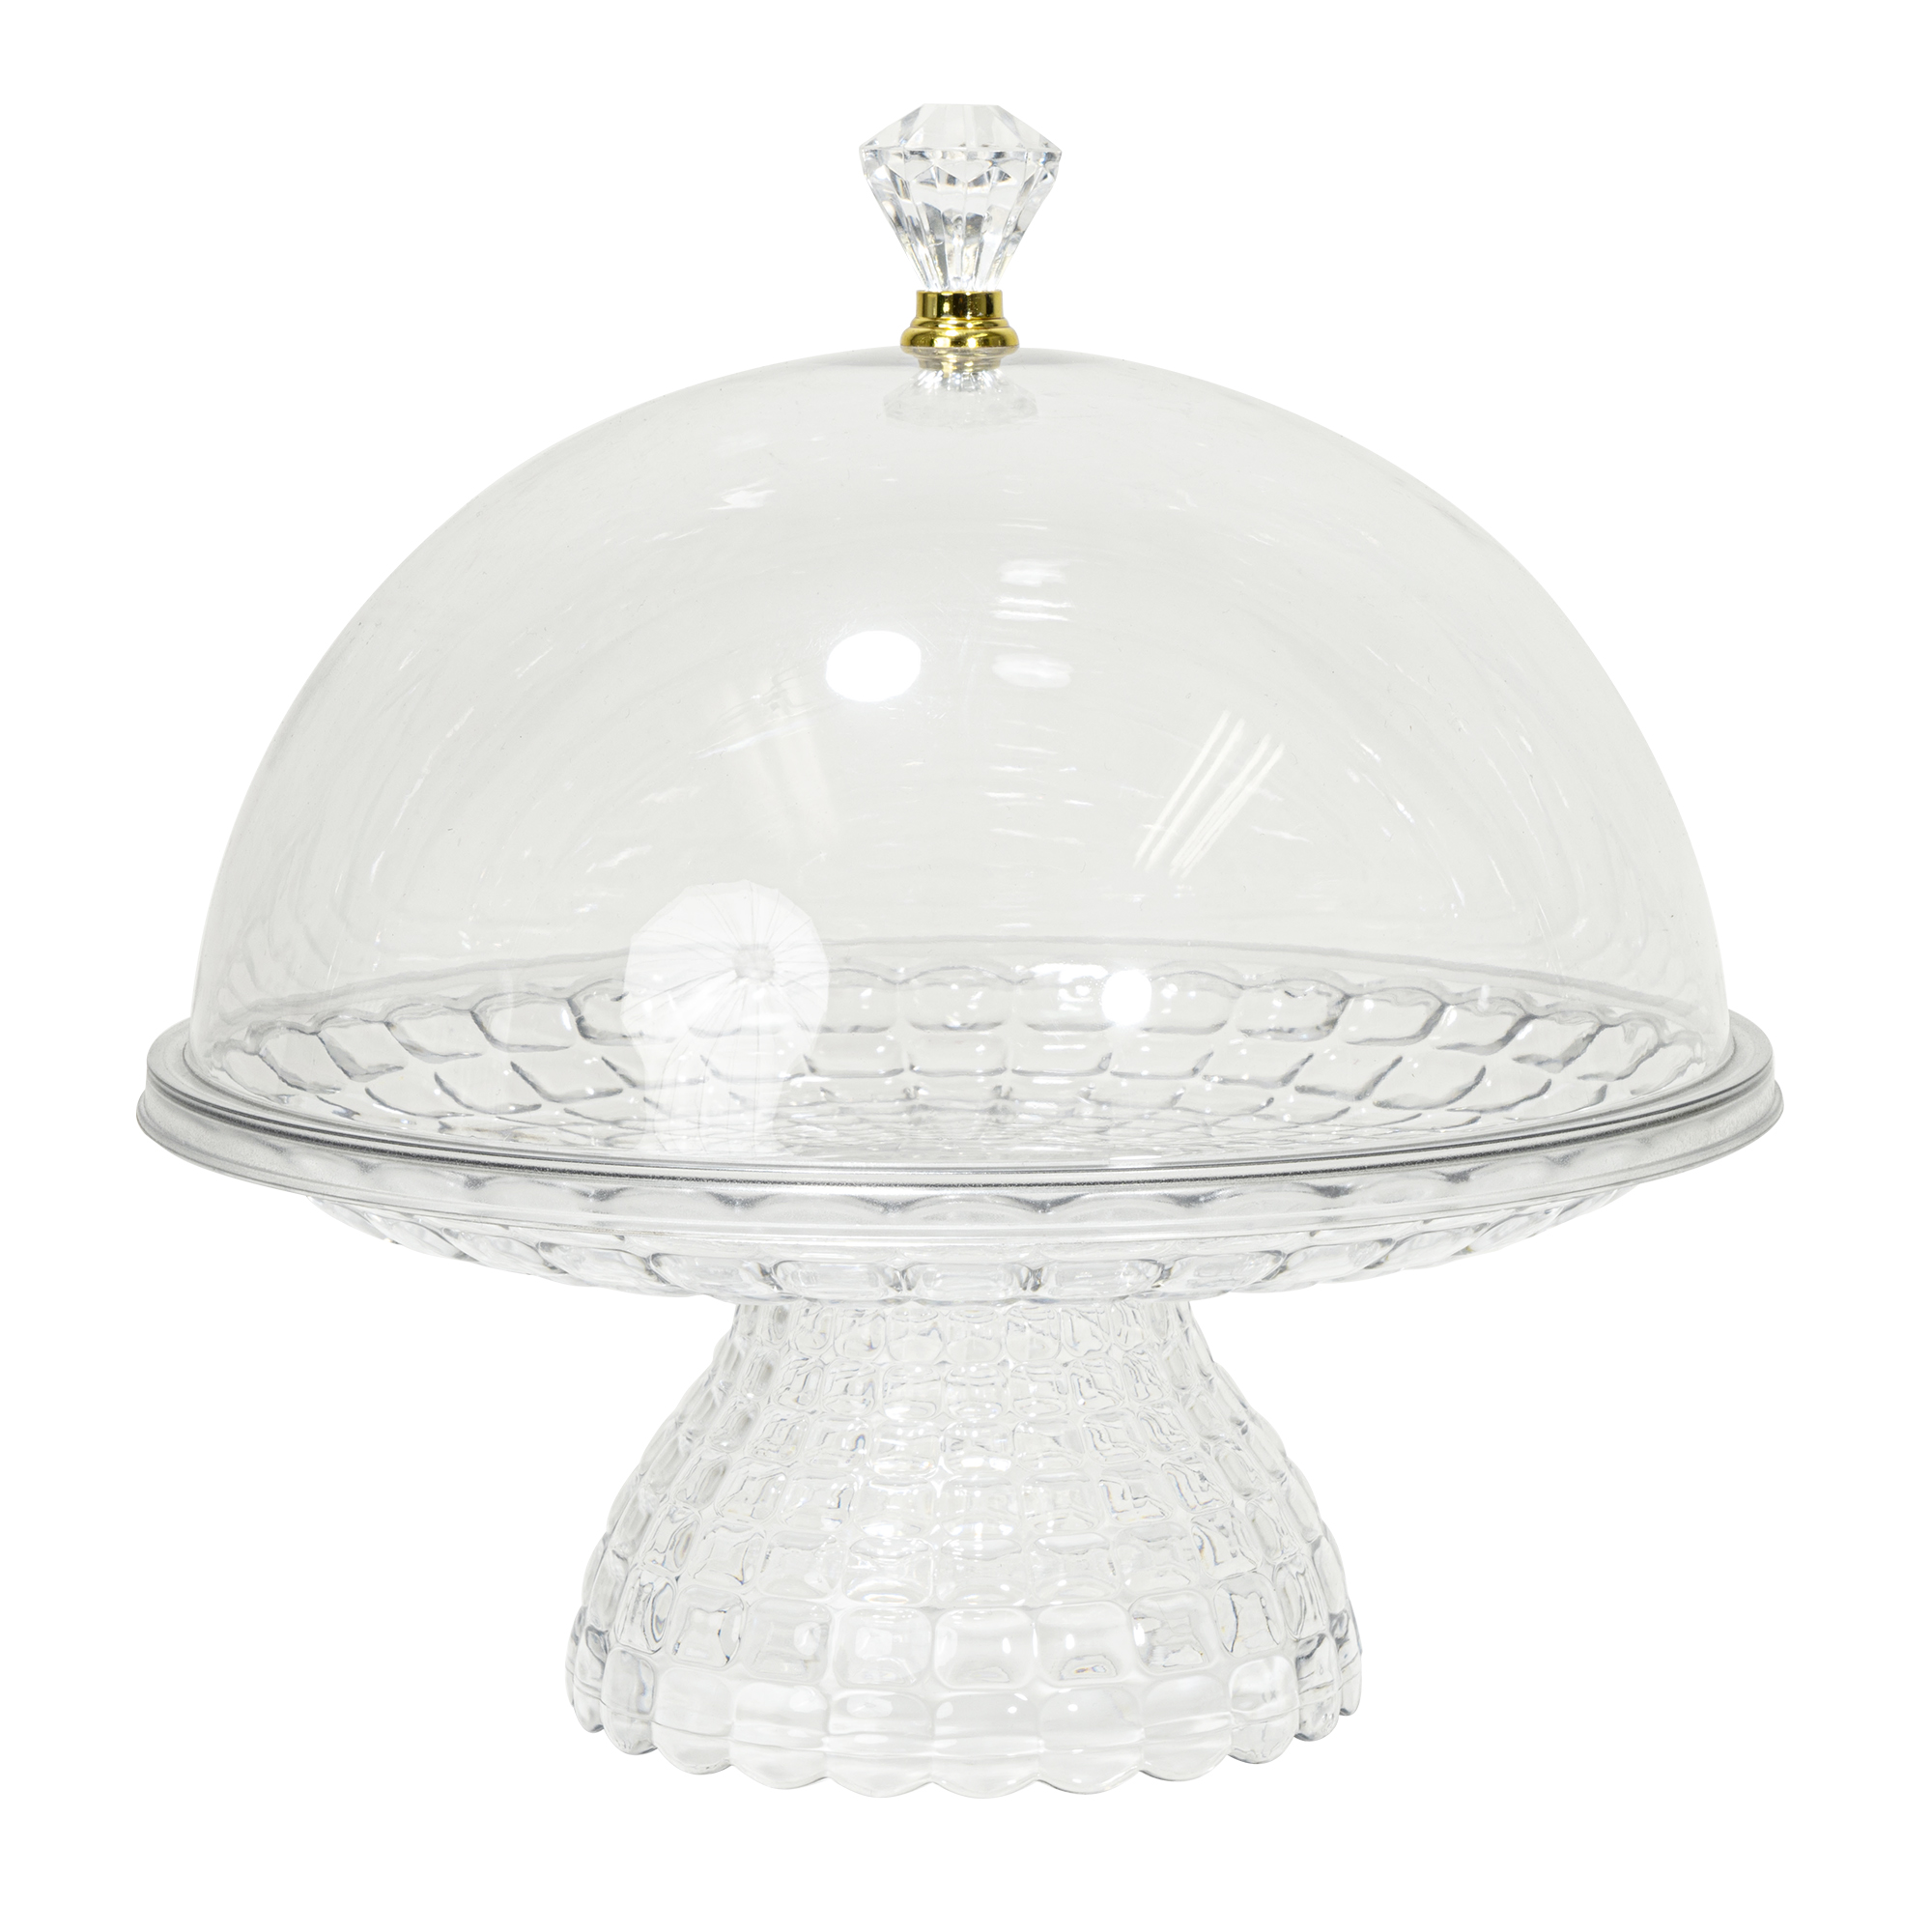 Plastic Cake Stand With Dome Lid 8" - Clear